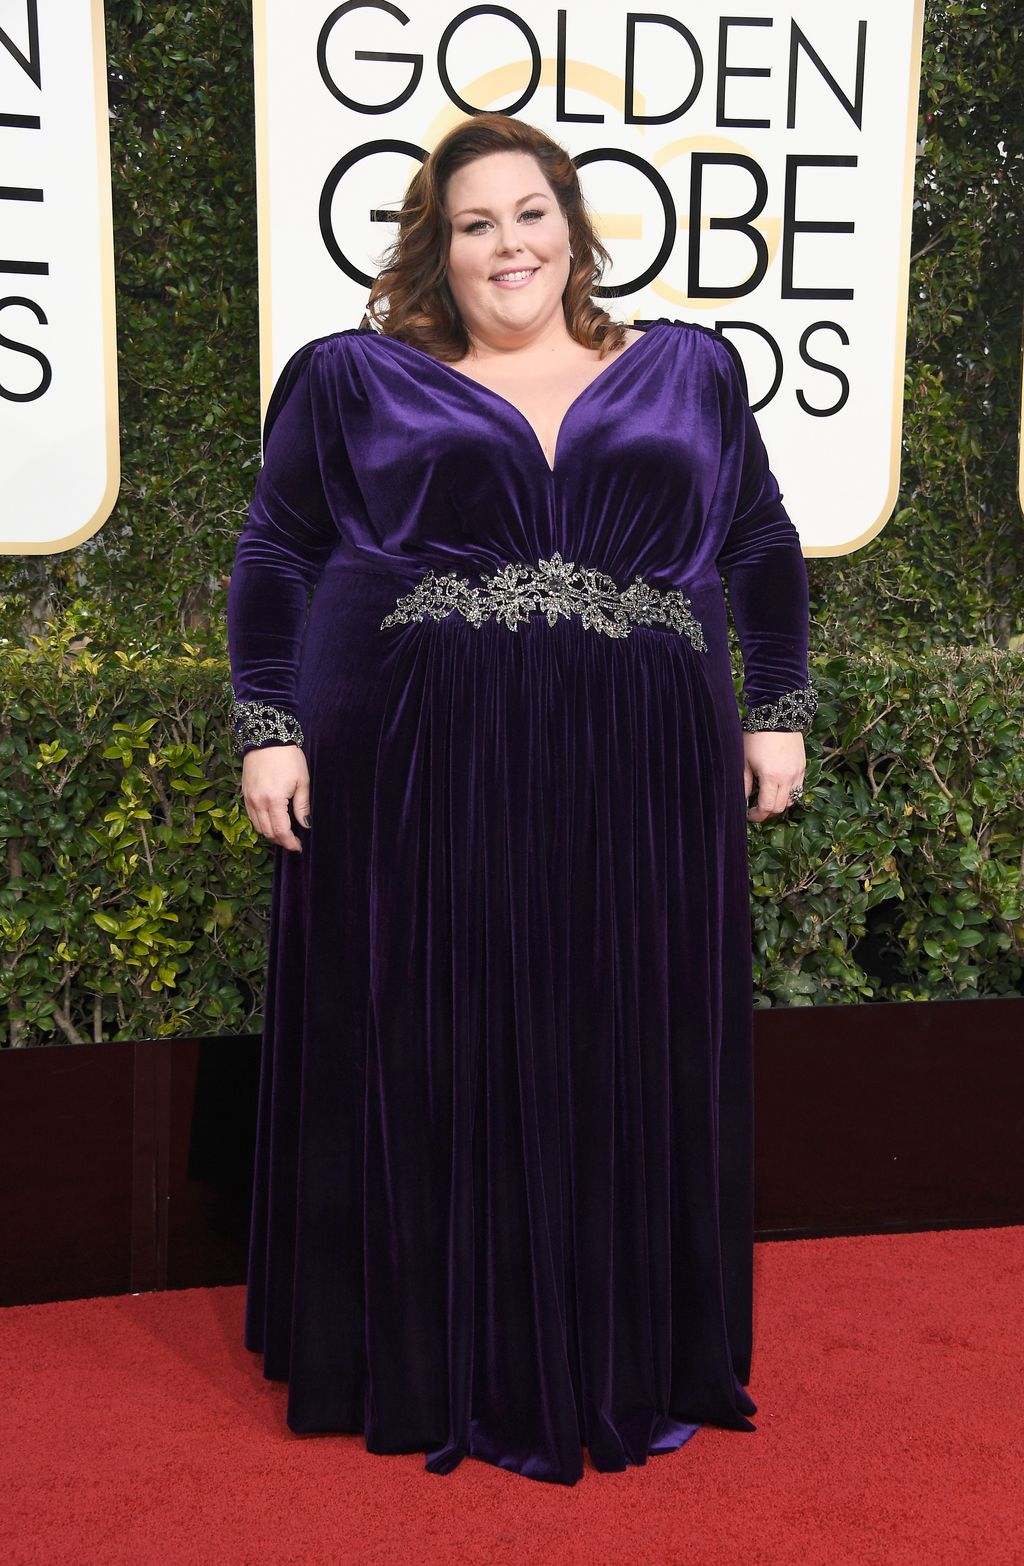 BEVERLY HILLS, CA - JANUARY 08:  Actress Chrissy Metz attends the 74th Annual Golden Globe Awards at The Beverly Hilton Hotel on January 8, 2017 in Beverly Hills, California.  (Photo by Frazer Harrison/Getty Images)